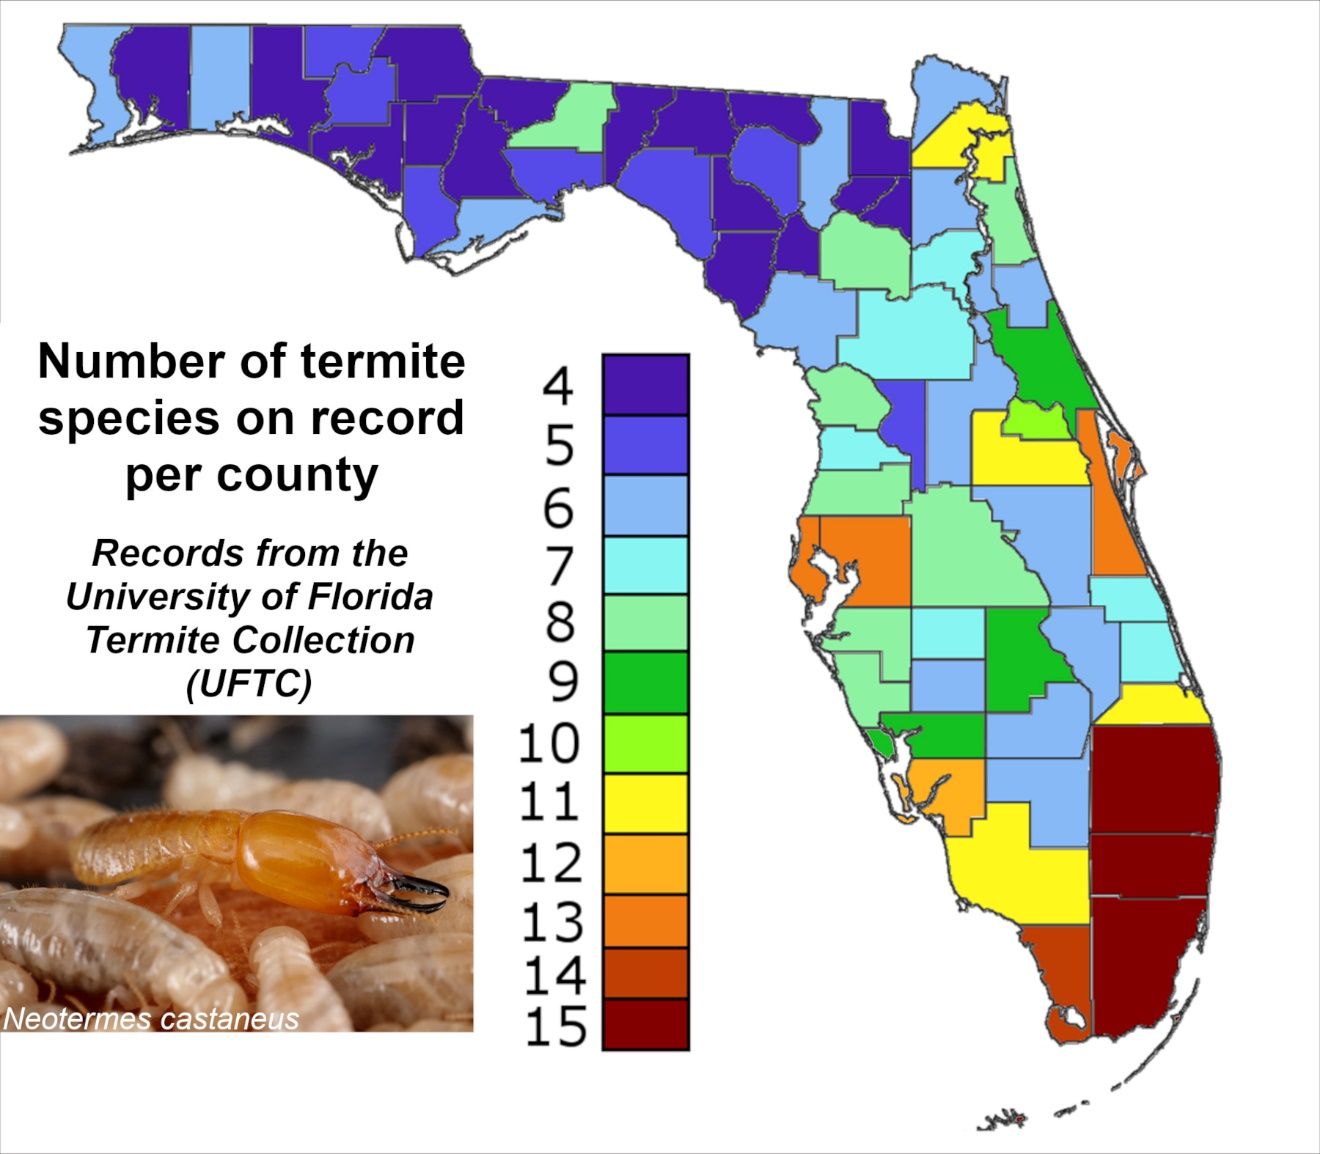 Number of termite species per county, according to the sample records from the University of Florida Termite Collection (UFTC) located at the Ft Lauderdale Research and Education Center (FLREC), as of 2021. In many counties, the records are incomplete owing to the large discrepancies of sampling efforts among locations. 